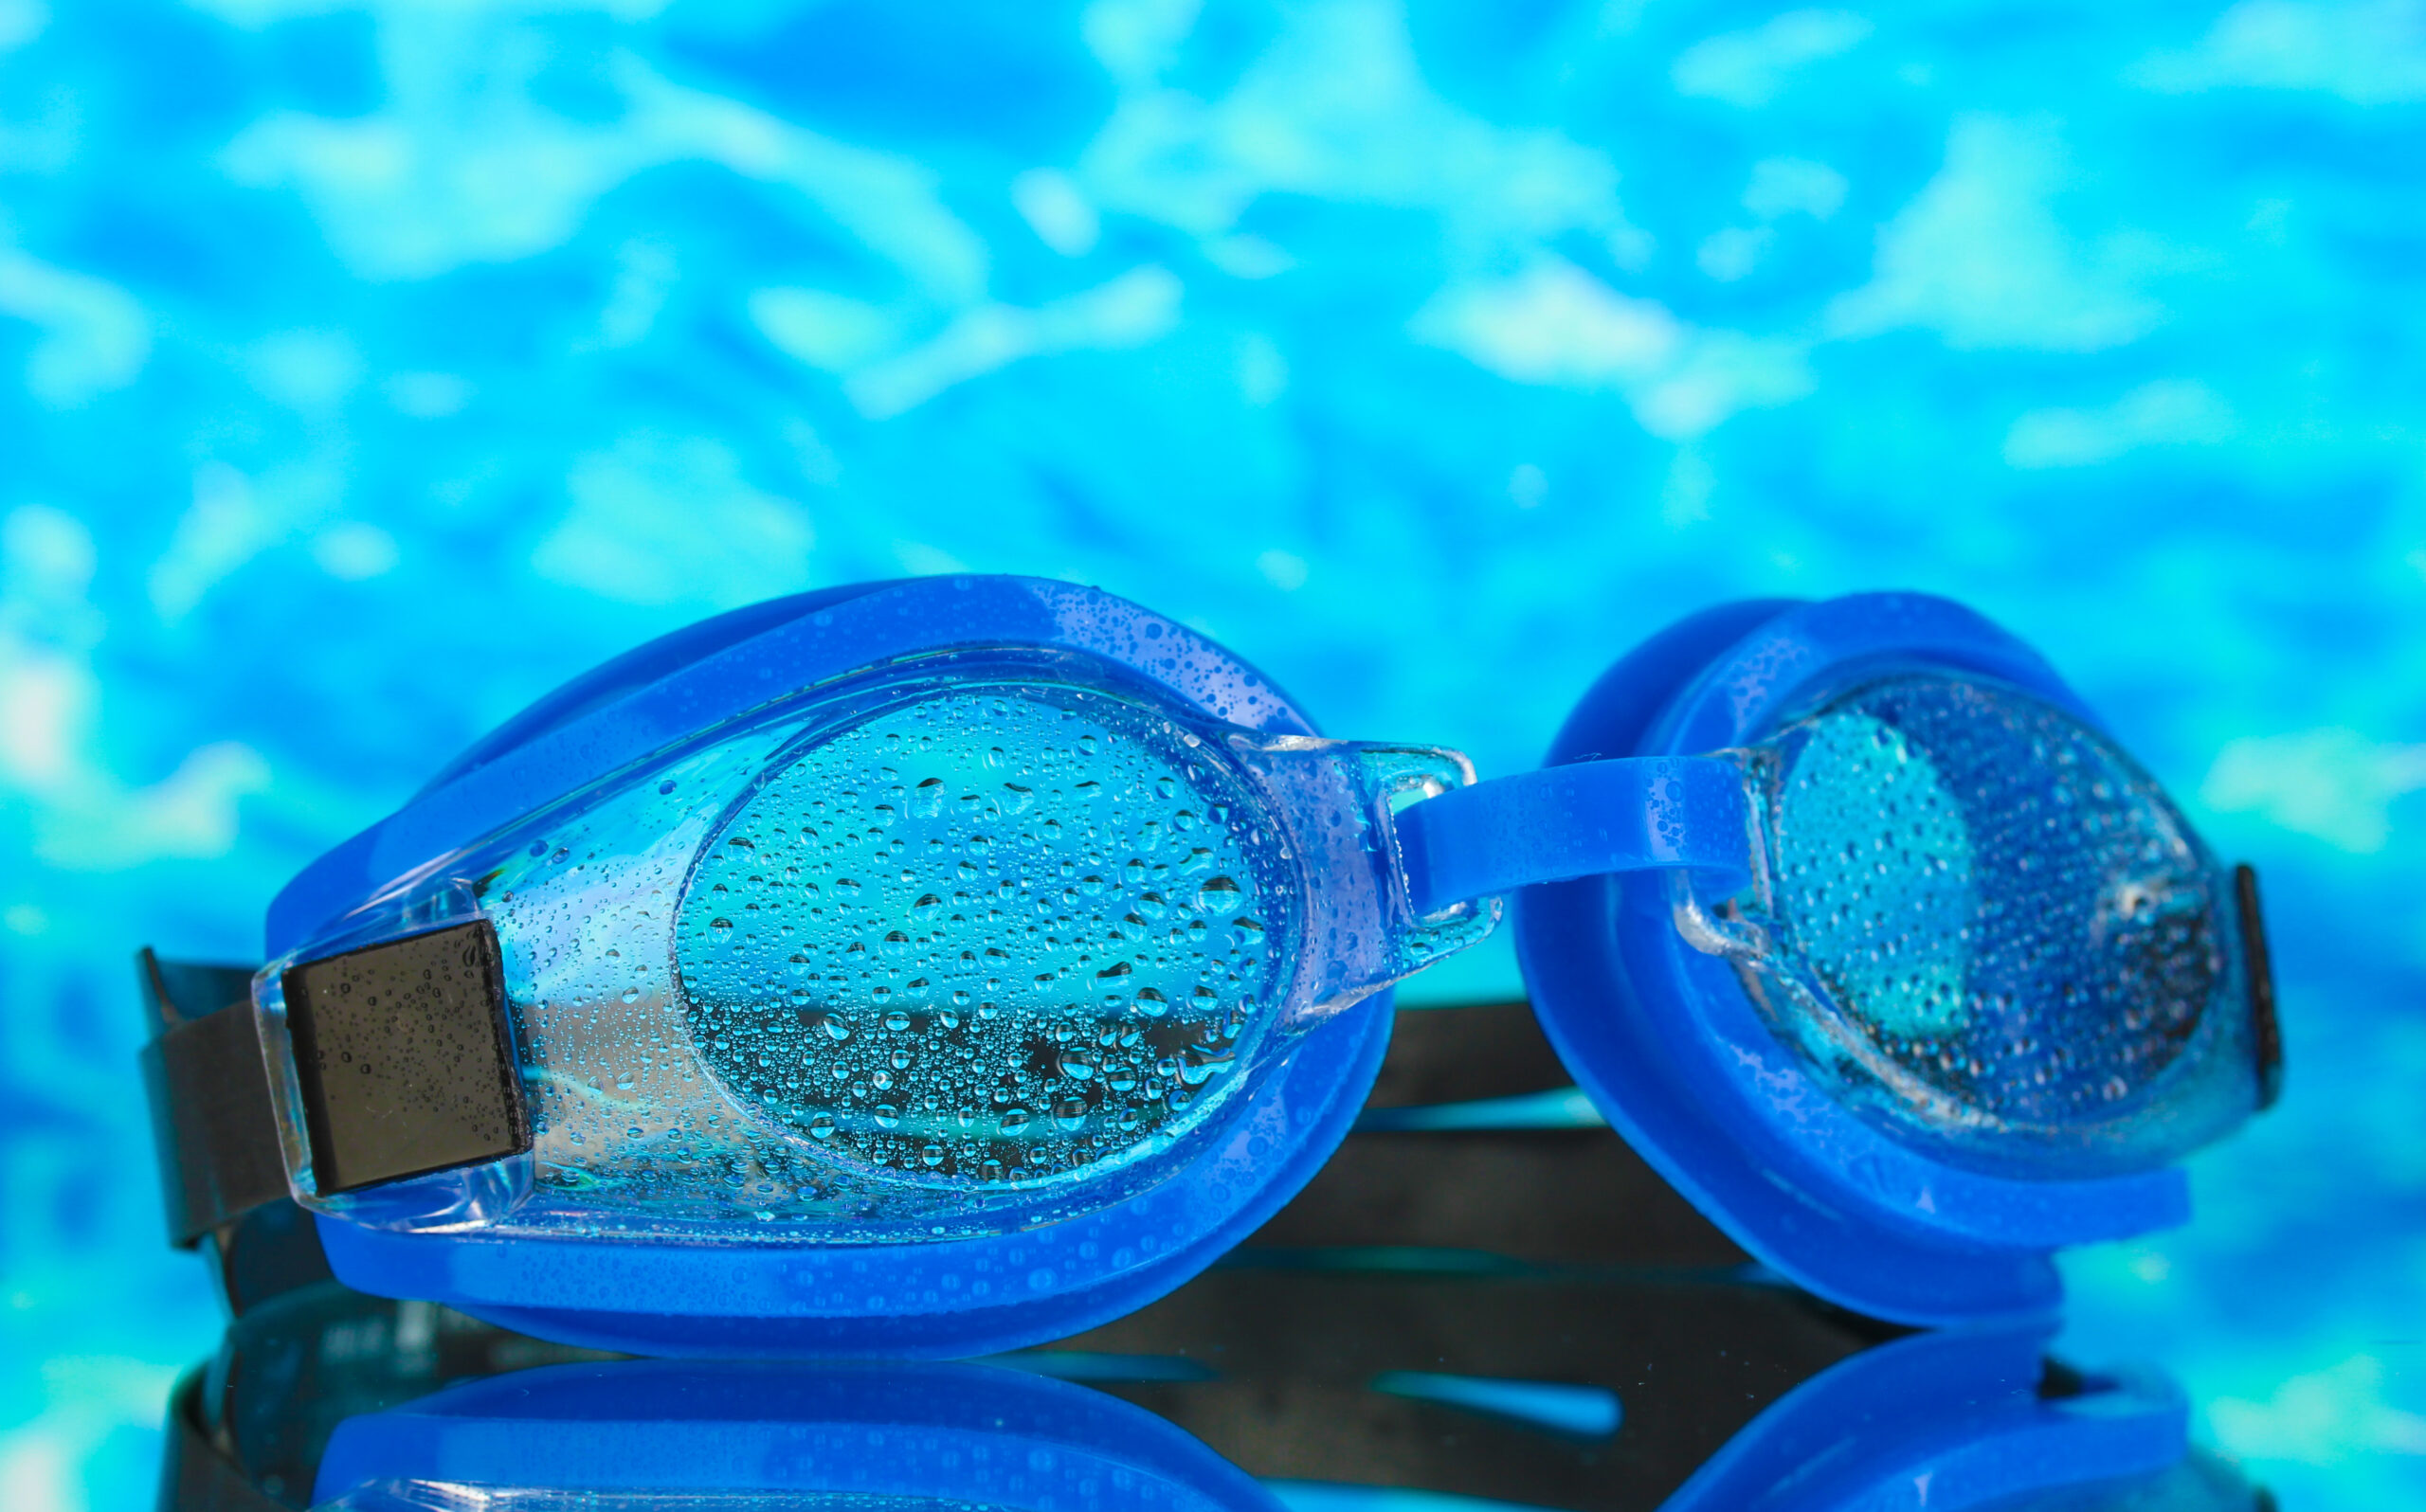 Pool goggles, protective eyewear designed for swimmers, providing clear vision underwater and protecting the eyes from chlorine or other irritants in the pool